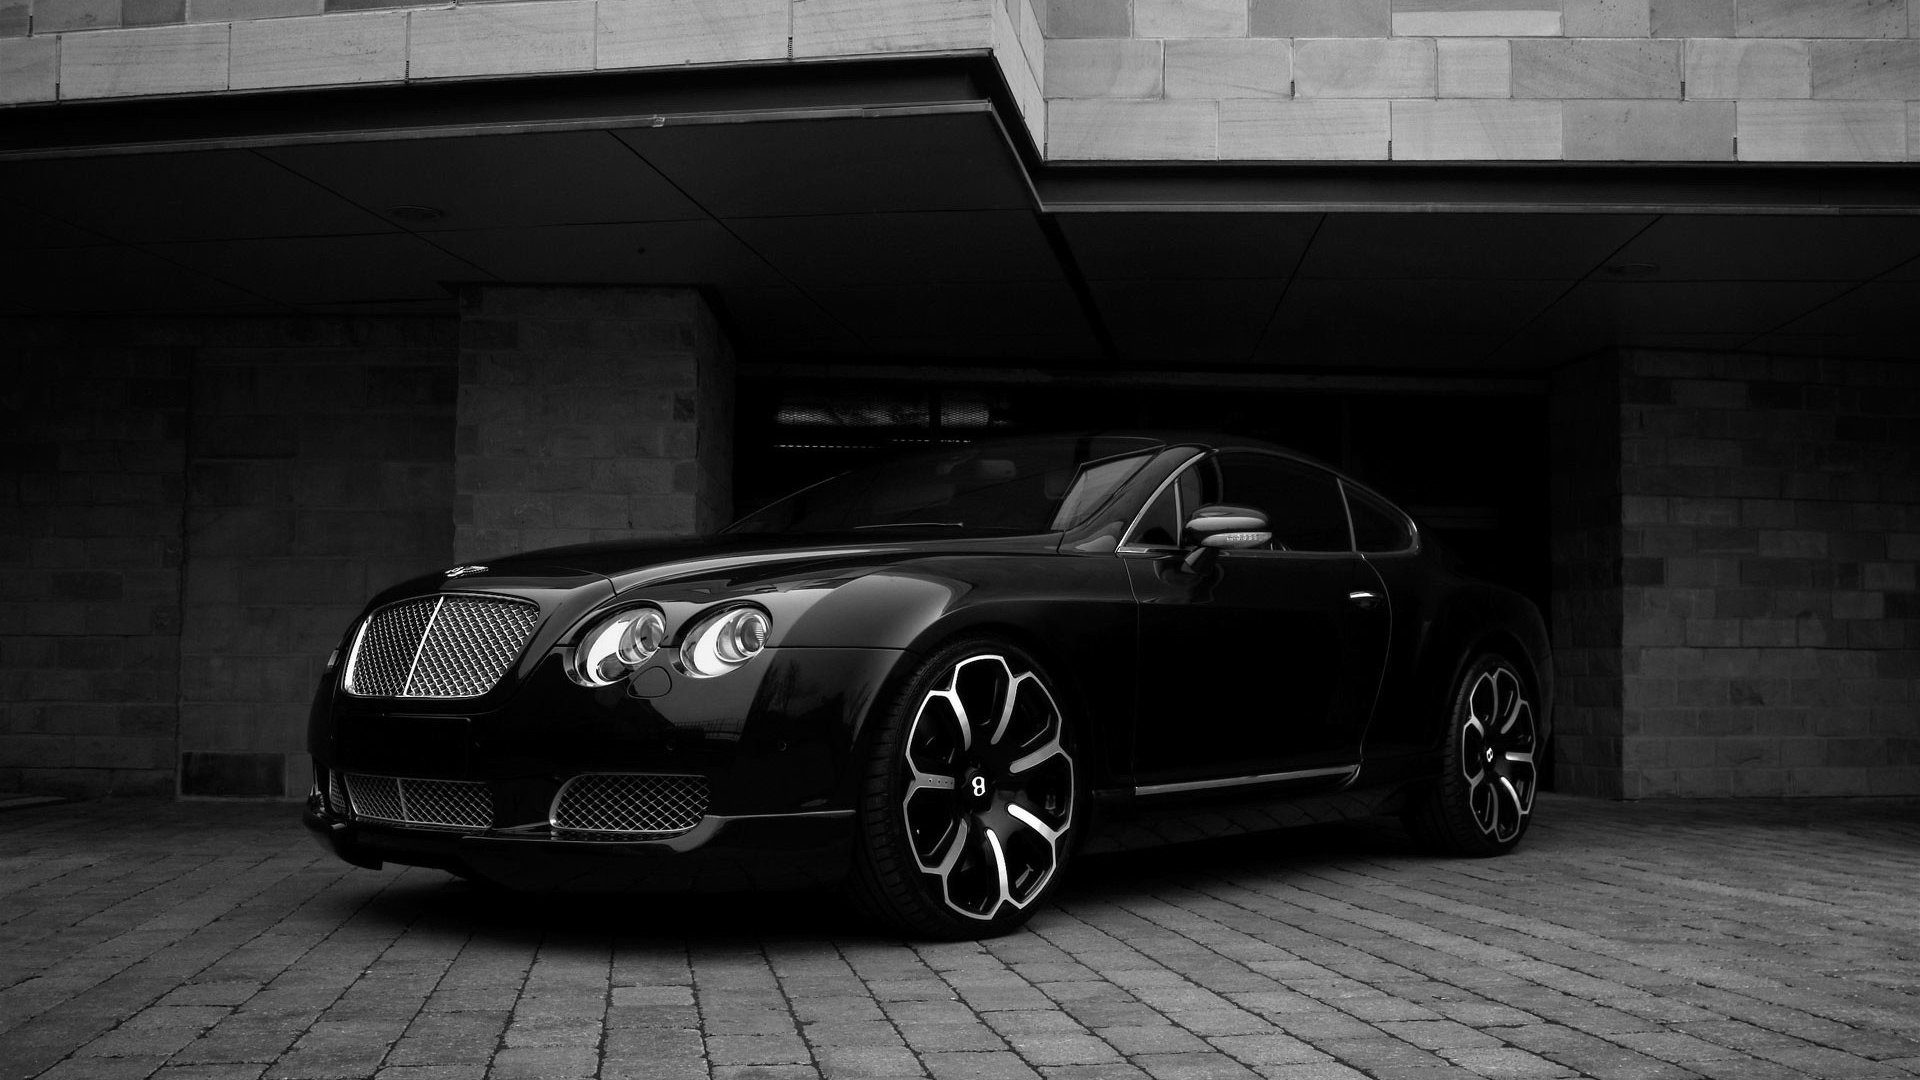 Black Bentley Front Angle for 1920 x 1080 HDTV 1080p resolution